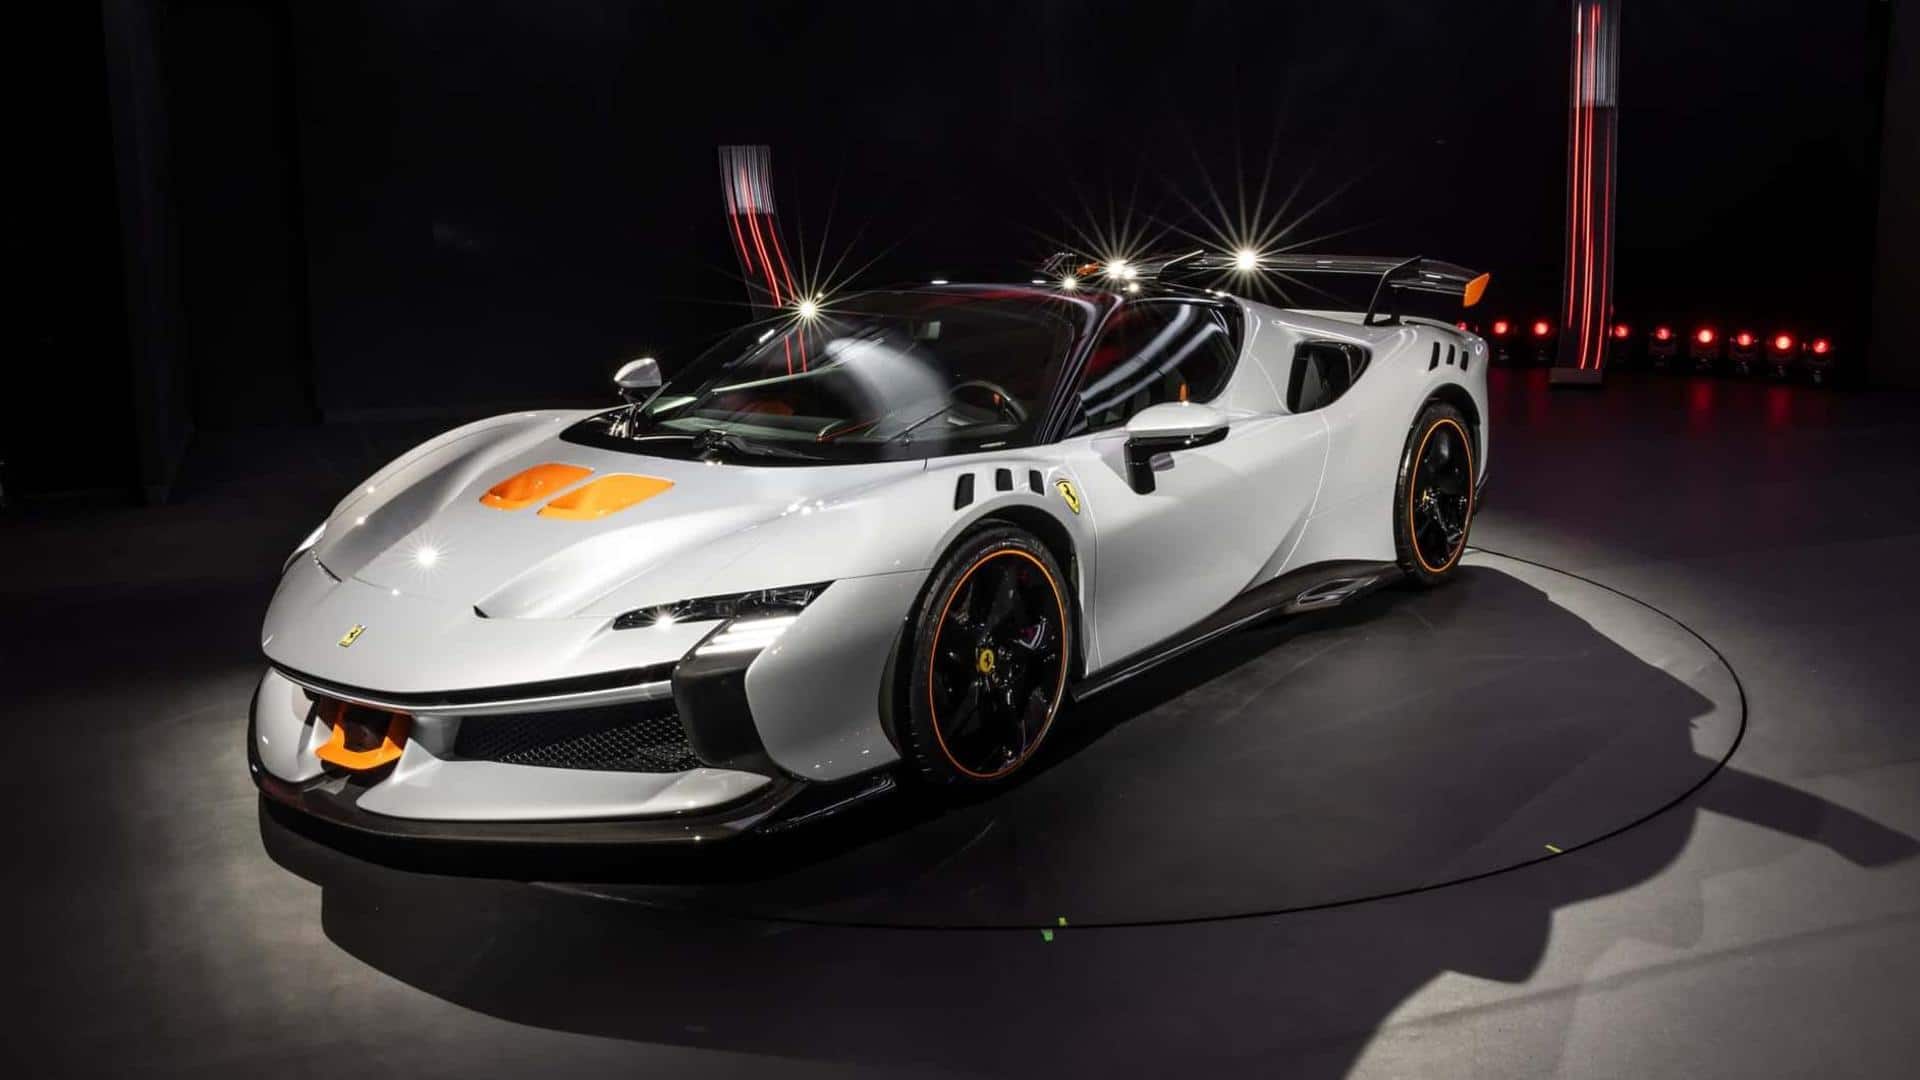 Street-legal Ferrari SF90 XX Stradale and Spider revealed: Check features